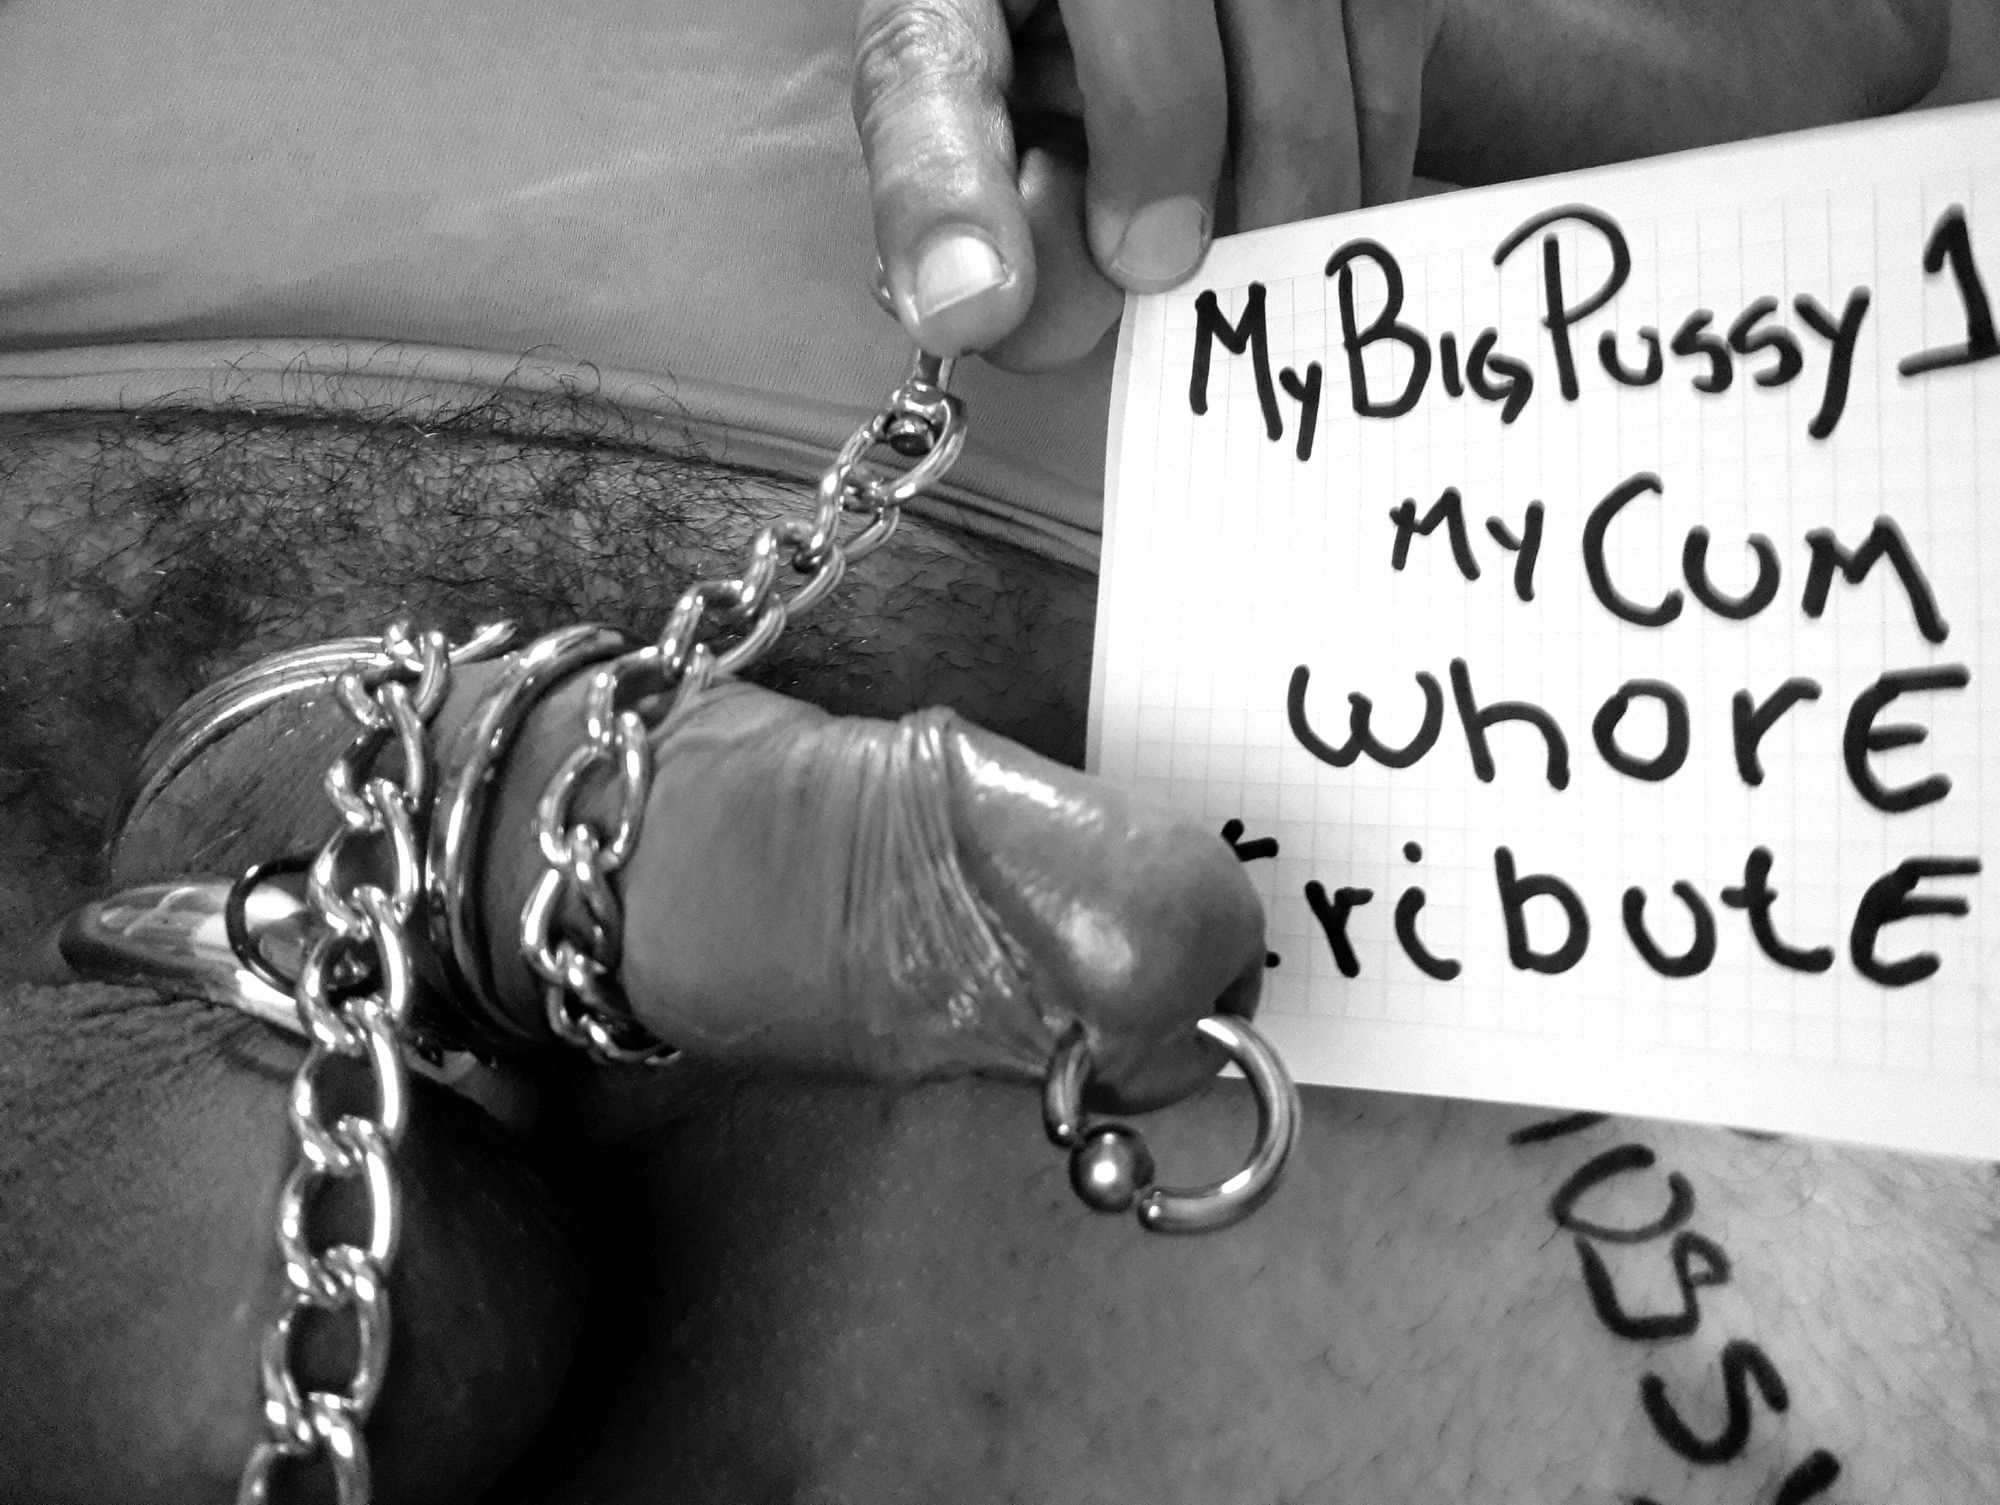 MyBigPussy1 Tribute Request #3